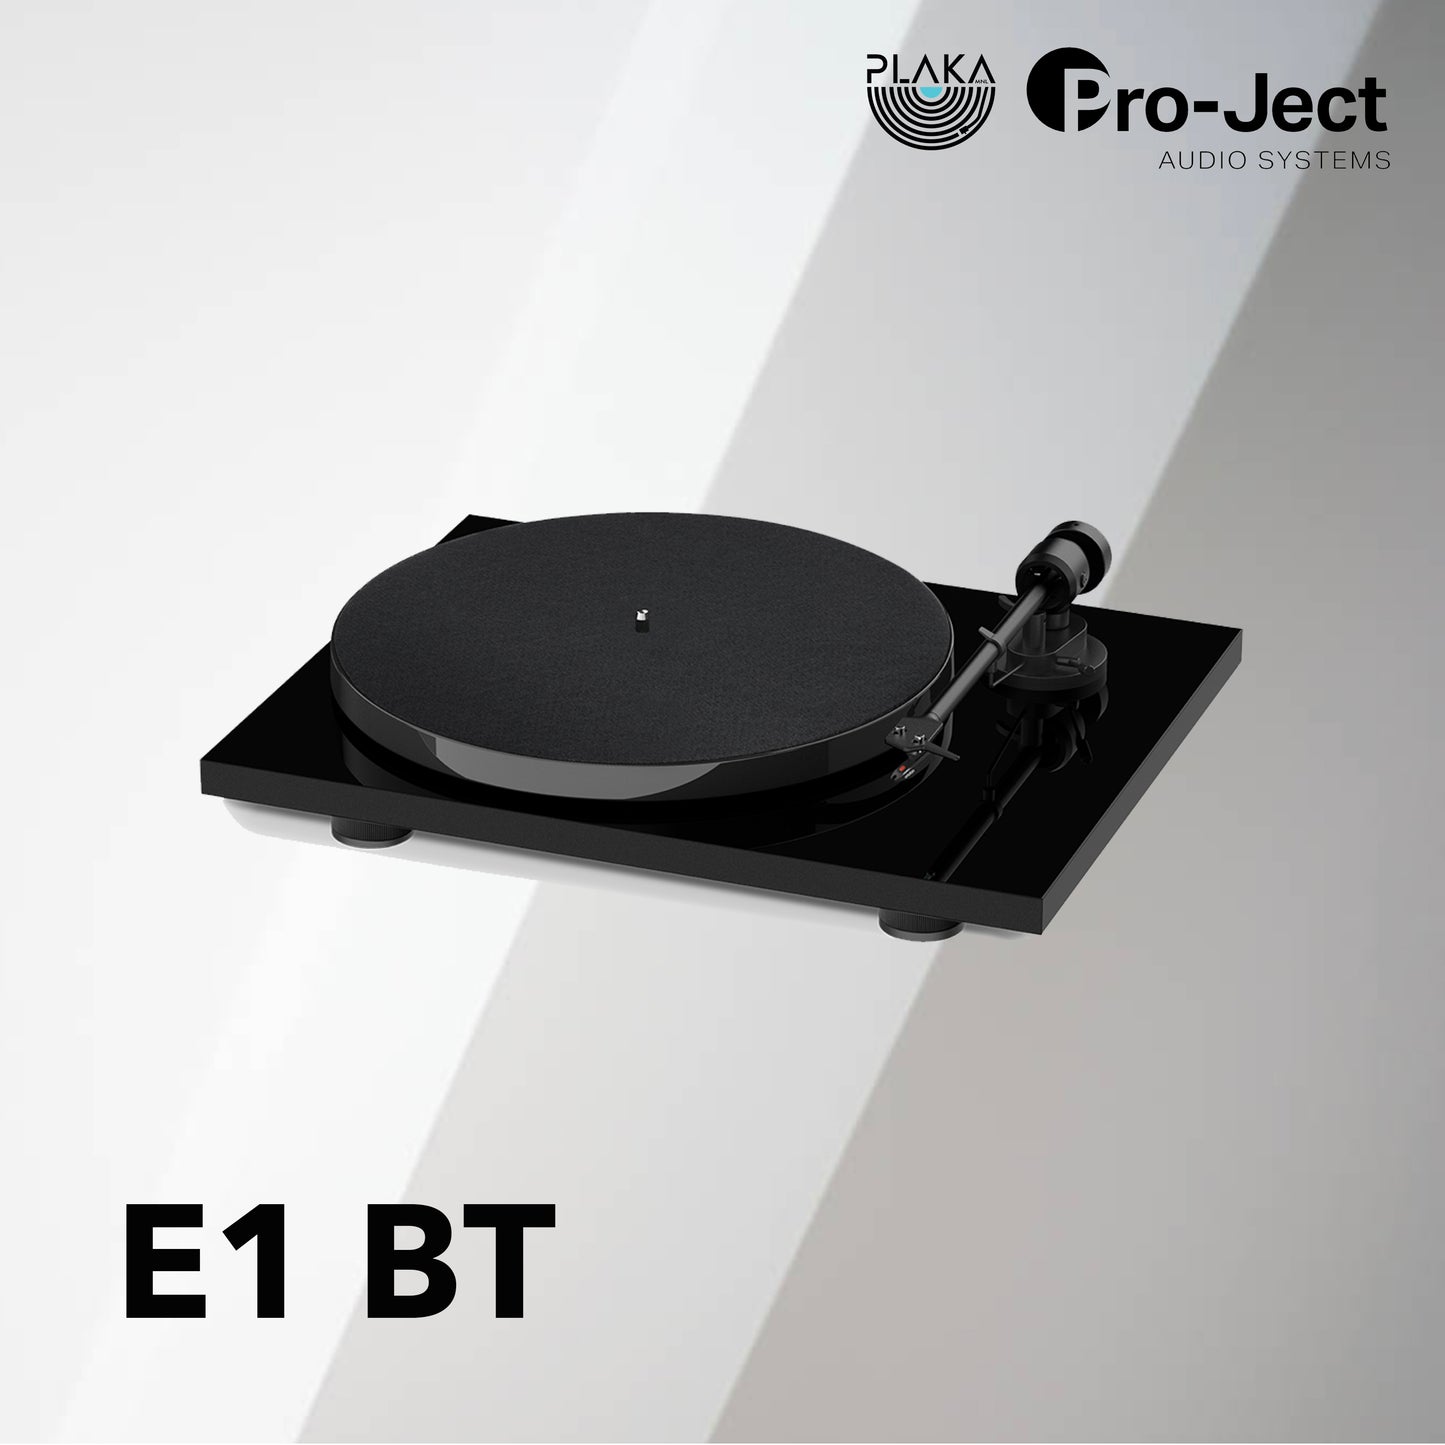 Pro-ject Primary E1 BT Turntable